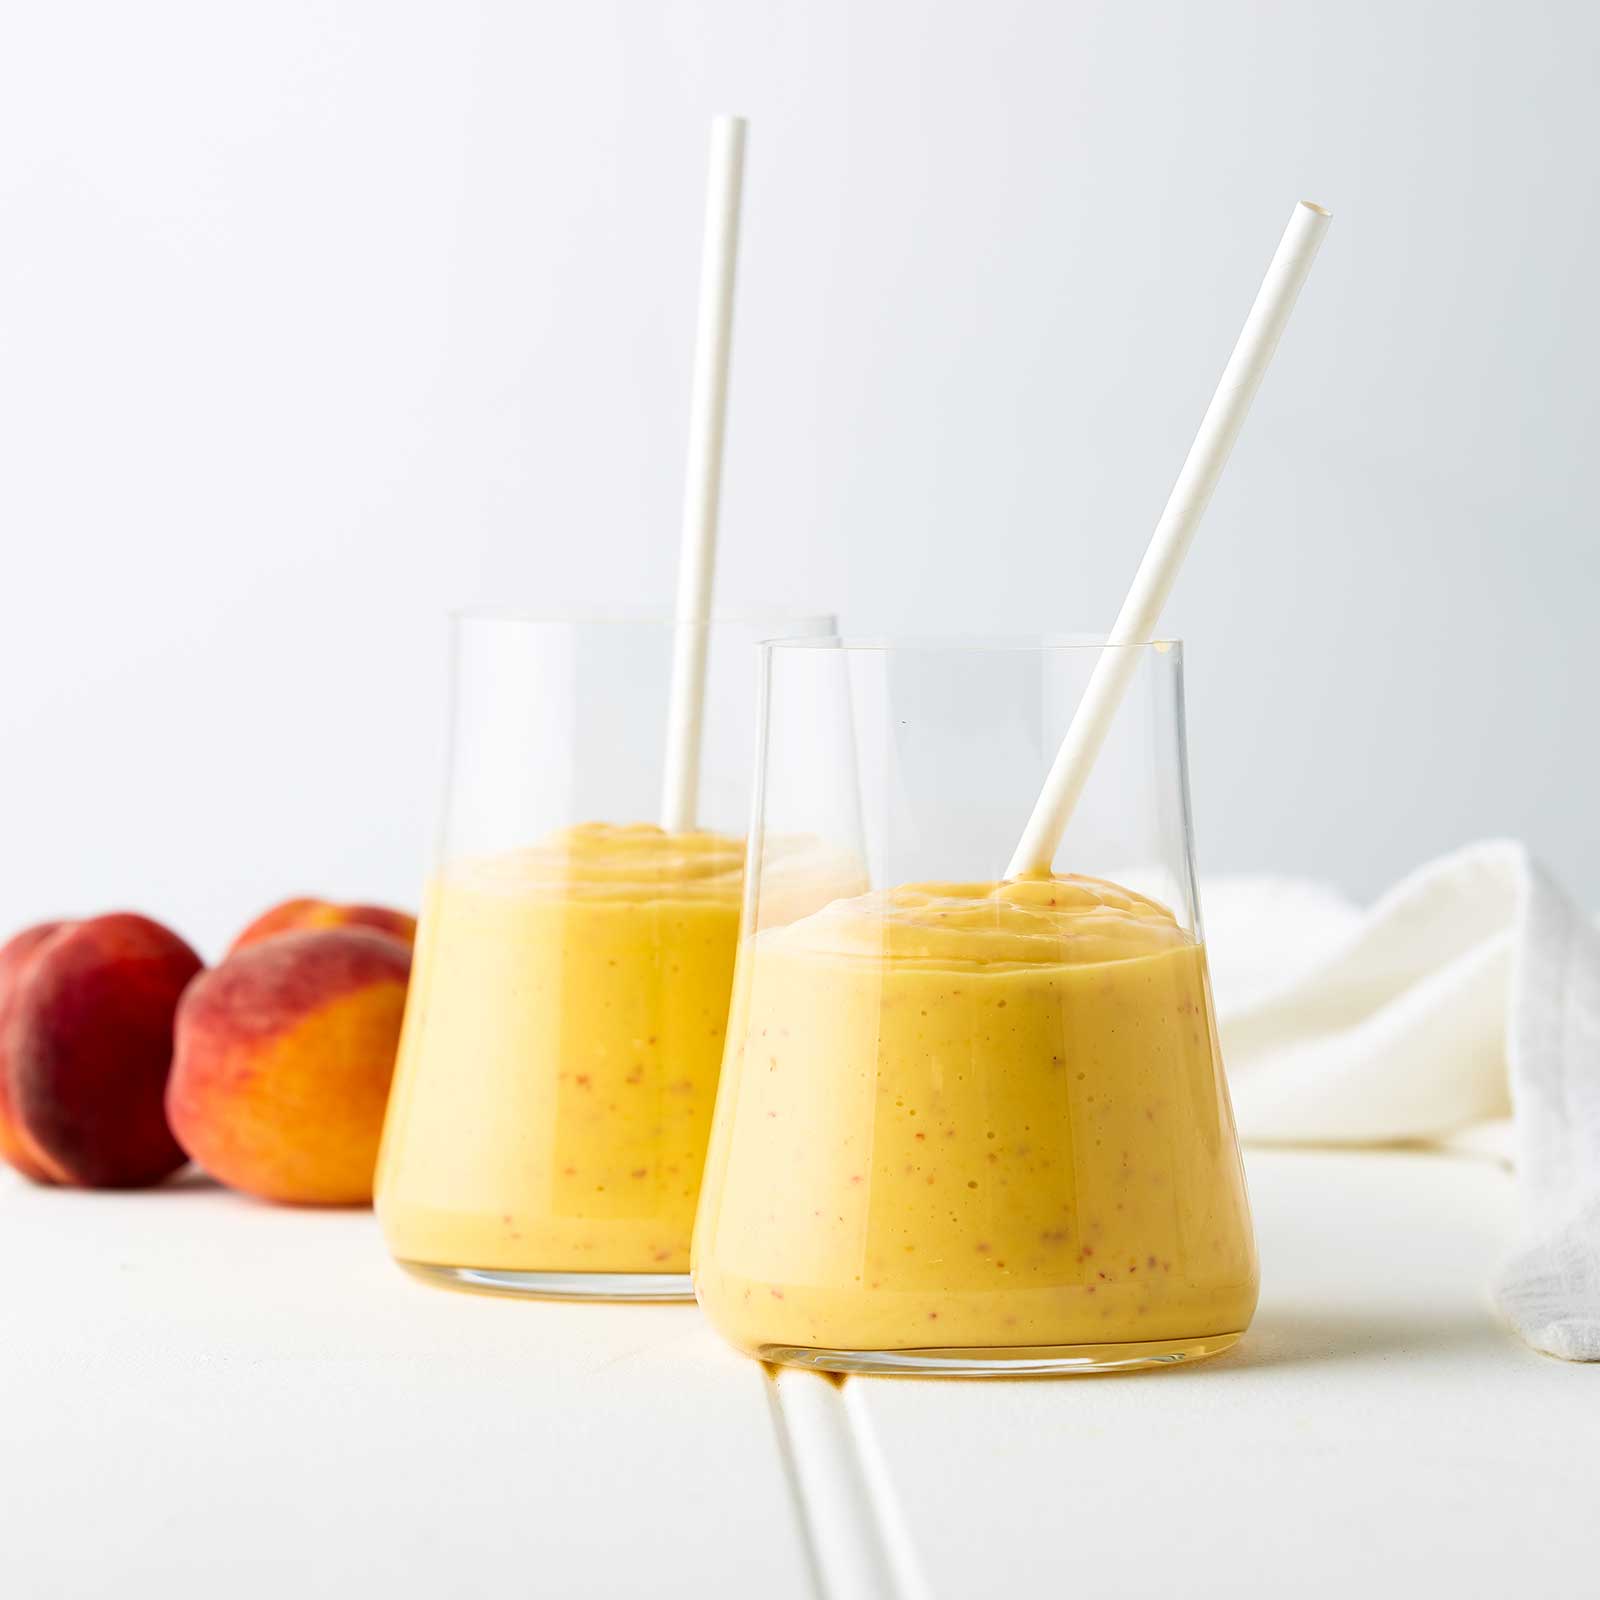 Two glass jars are half-full with spiced tropical smoothie. Both glasses hold a white paper straw. Two peaches sit at the back of the image behind the glasses.